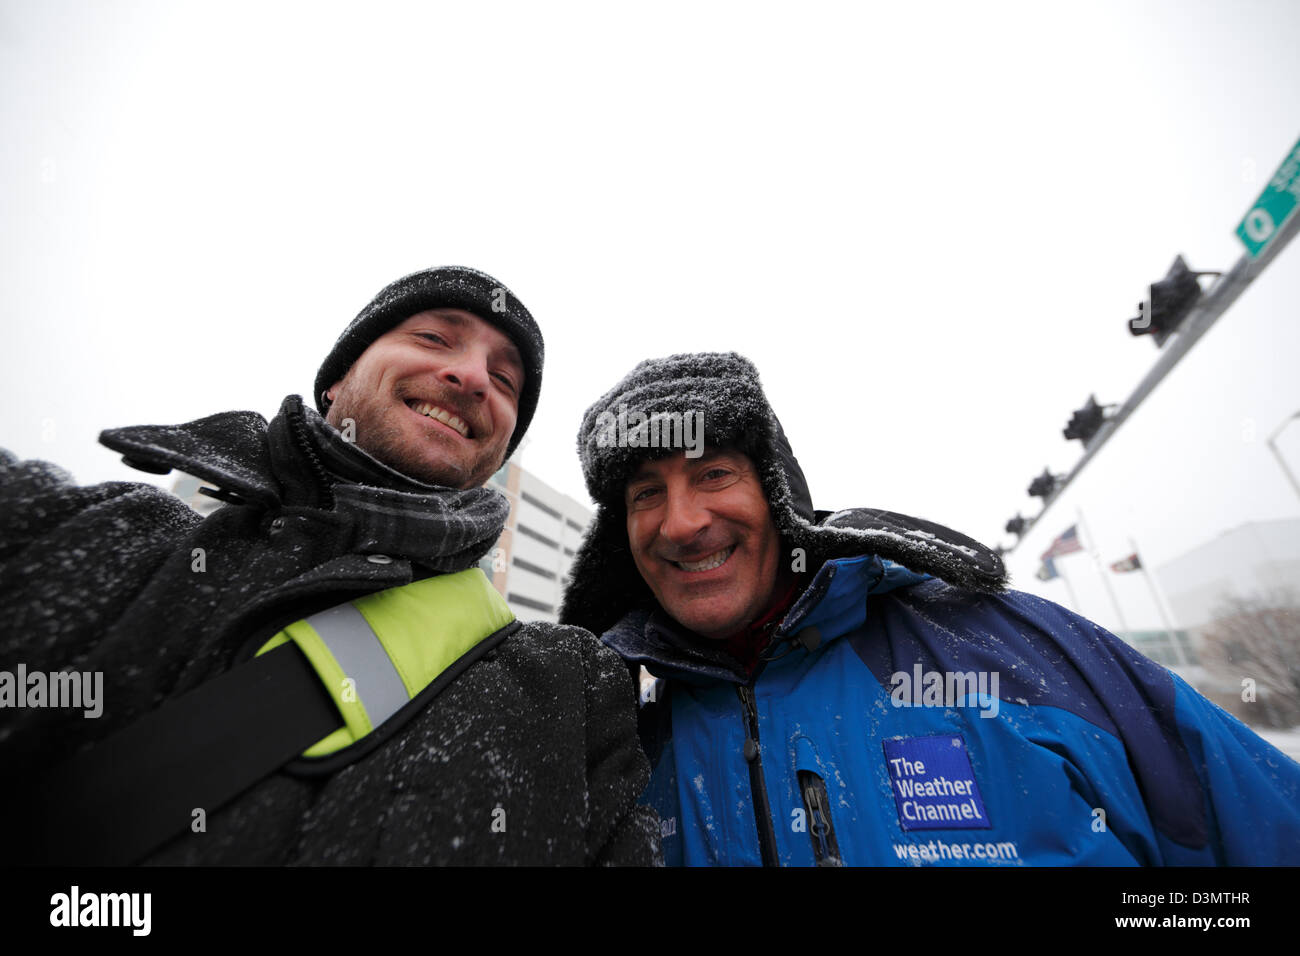 Lincoln, Nebraska, USA. 21st February 2013. Jim Cantore (right) poses for a photograph in Lincoln, Nebraska between breaks reporting on a winter storm. Credit:  LorenRyePhoto / Alamy Live News Stock Photo